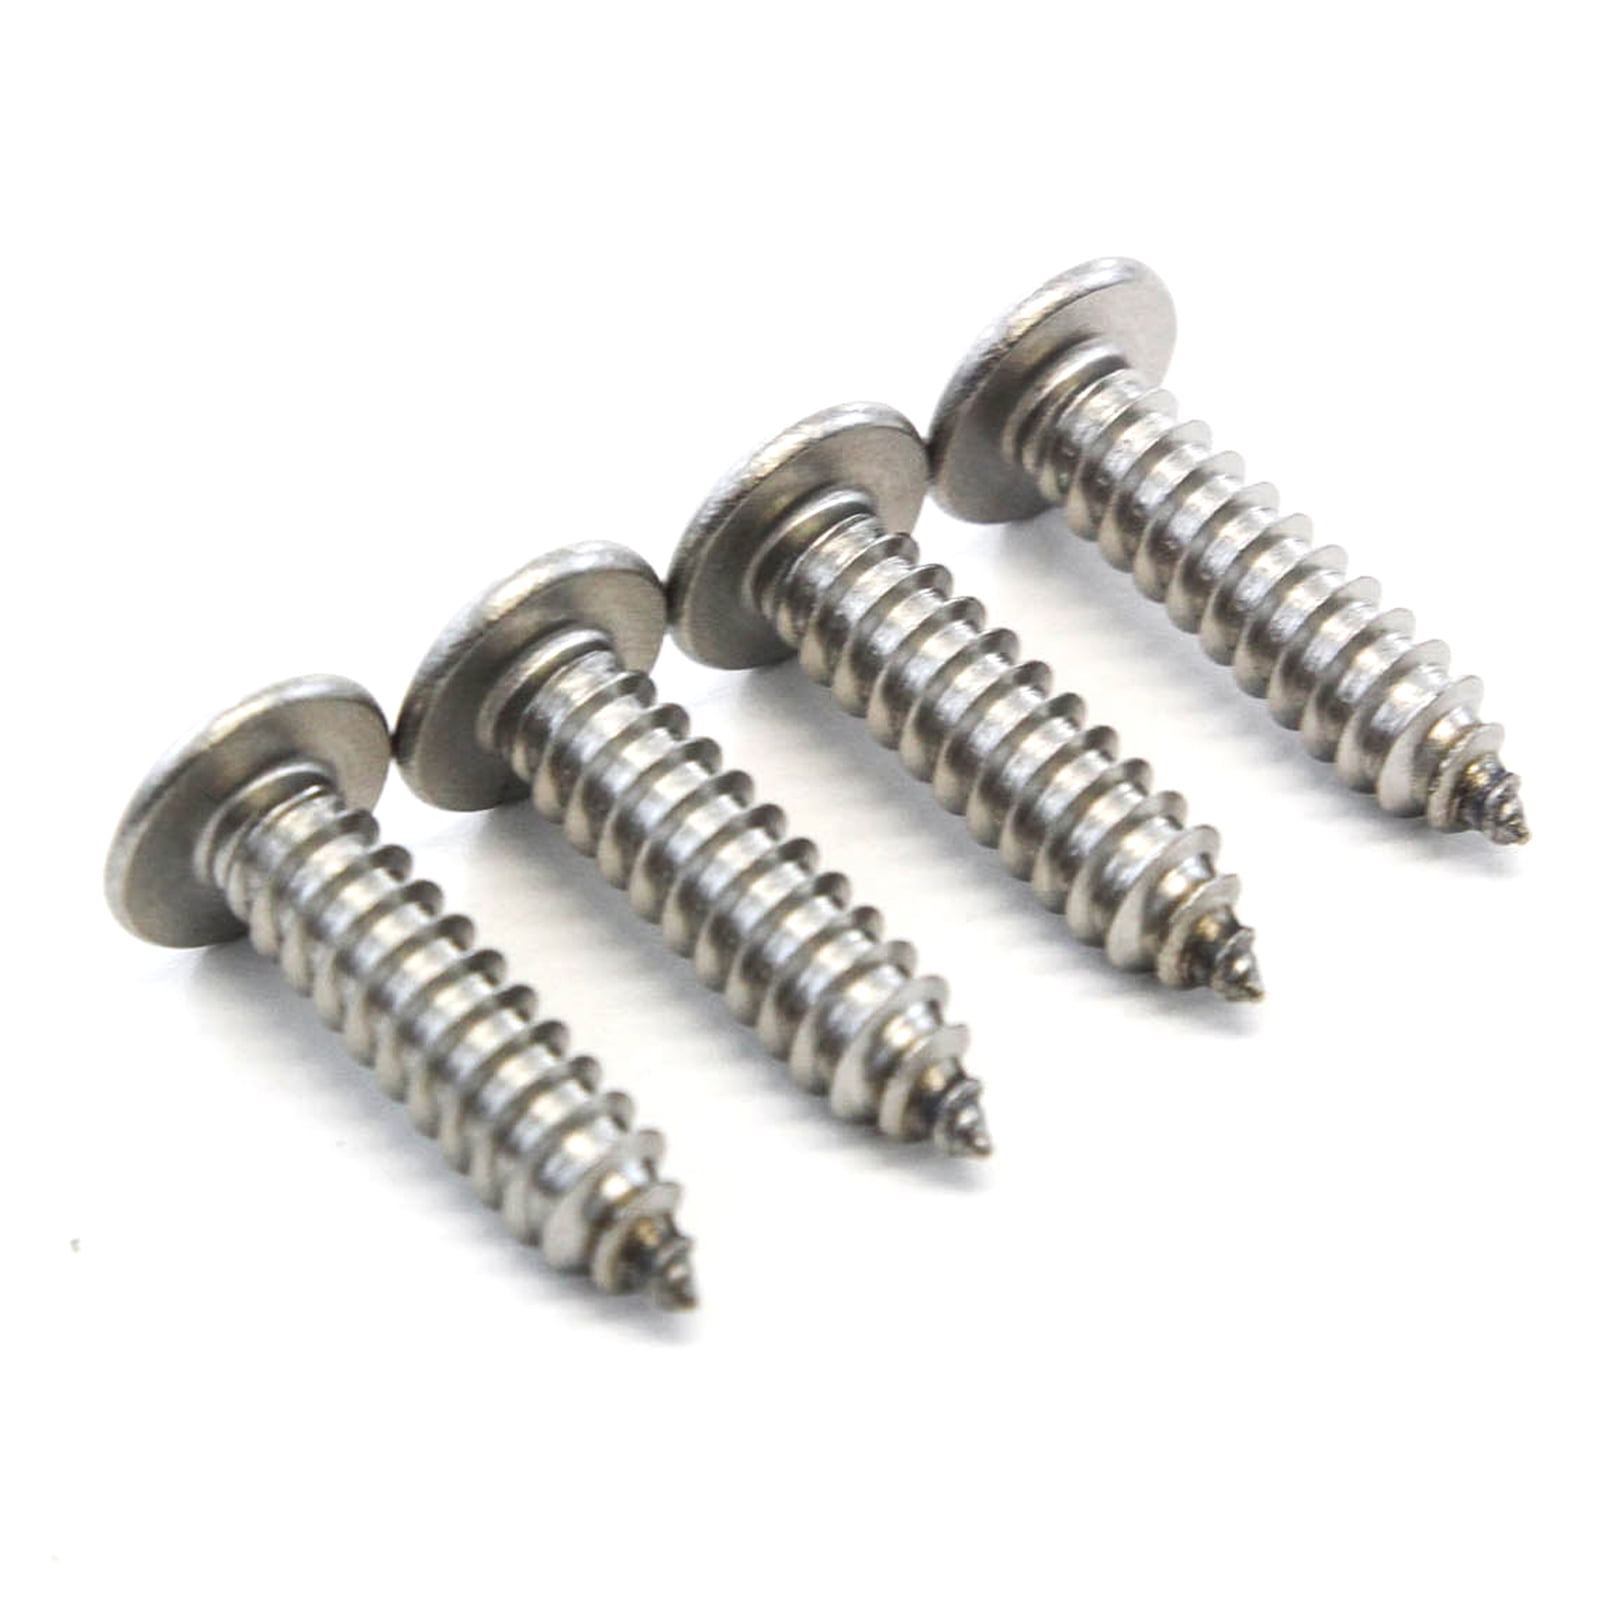 Frames Set of 12 Rustproof License Plate Frame Screws for Fastening License Plates Stainless Steel and Covers on Domestic Vehicles OttoSpeed Stainless License Plate Screws